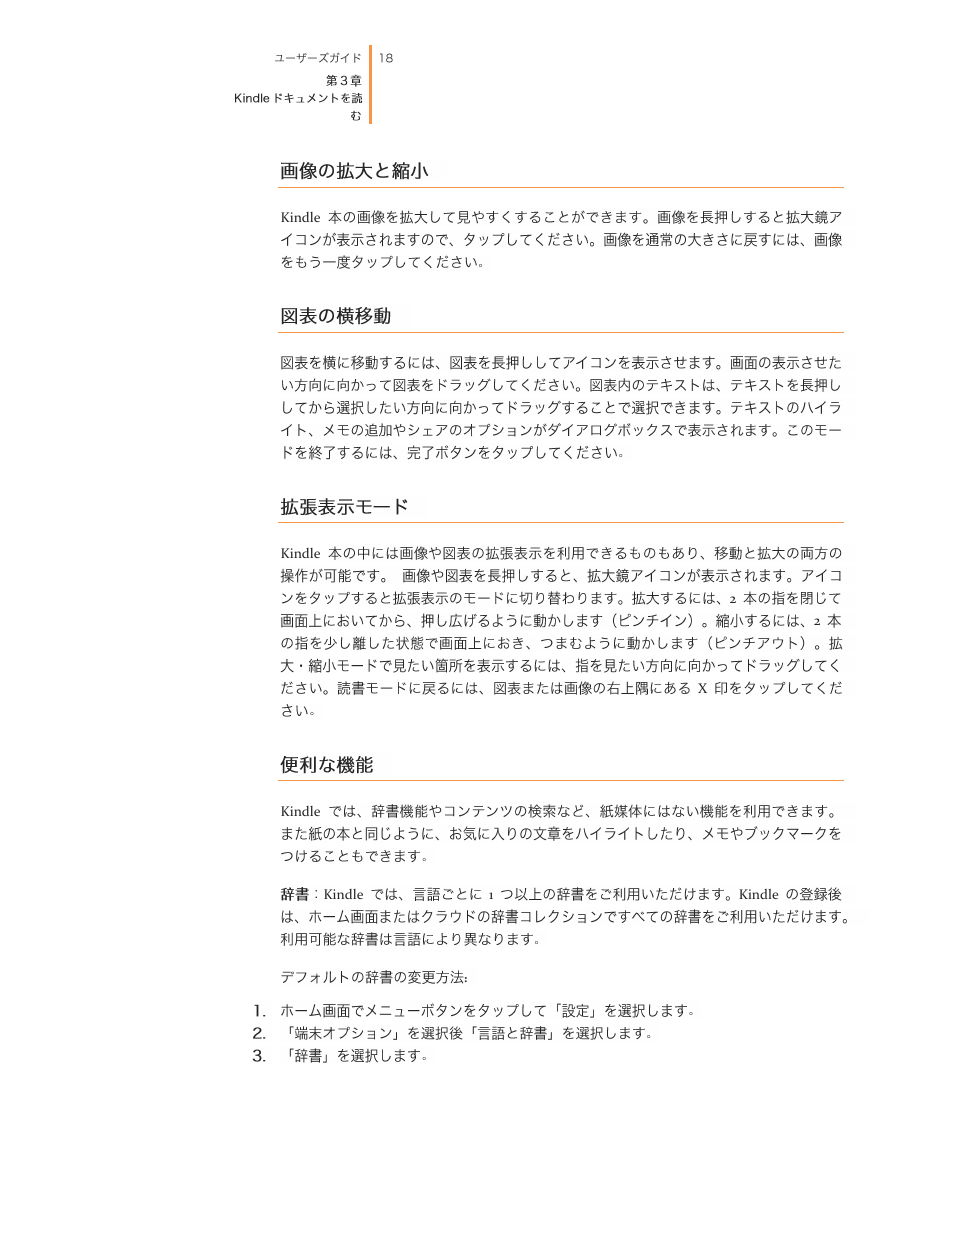 Kindle 2nd edition User Guide User Manual | Page 18 / 35